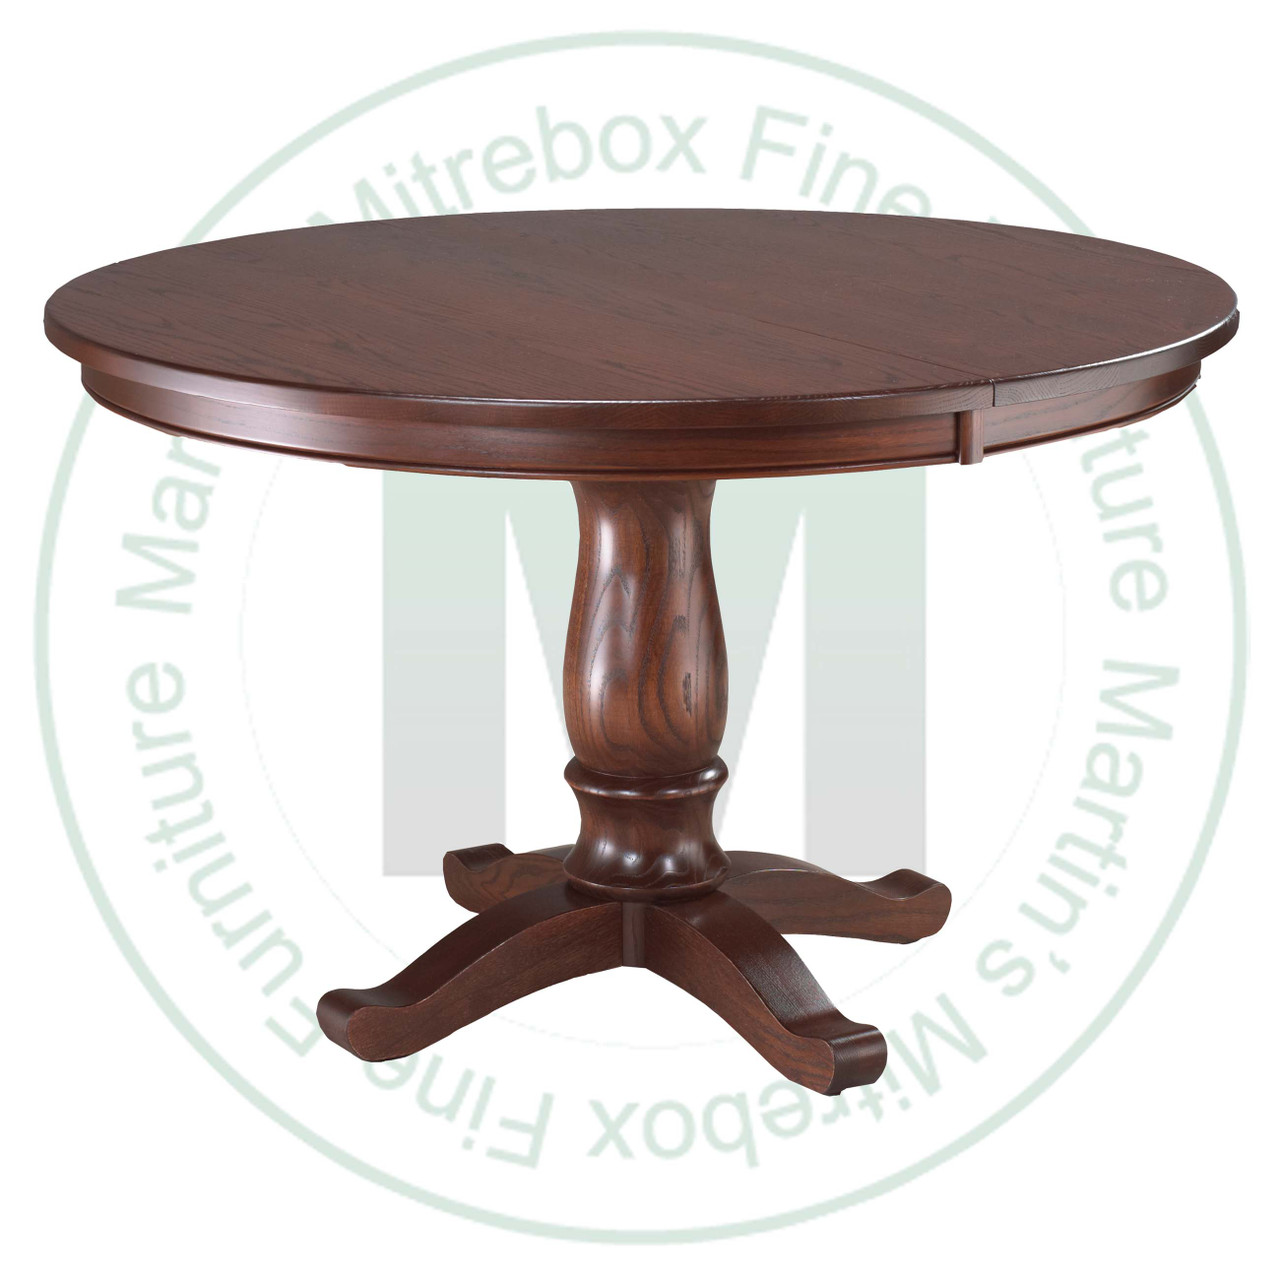 Maple Kimberly Crest Single Pedestal Table 60''D x 60''W x 30''H With 1 - 12'' Leaf Table